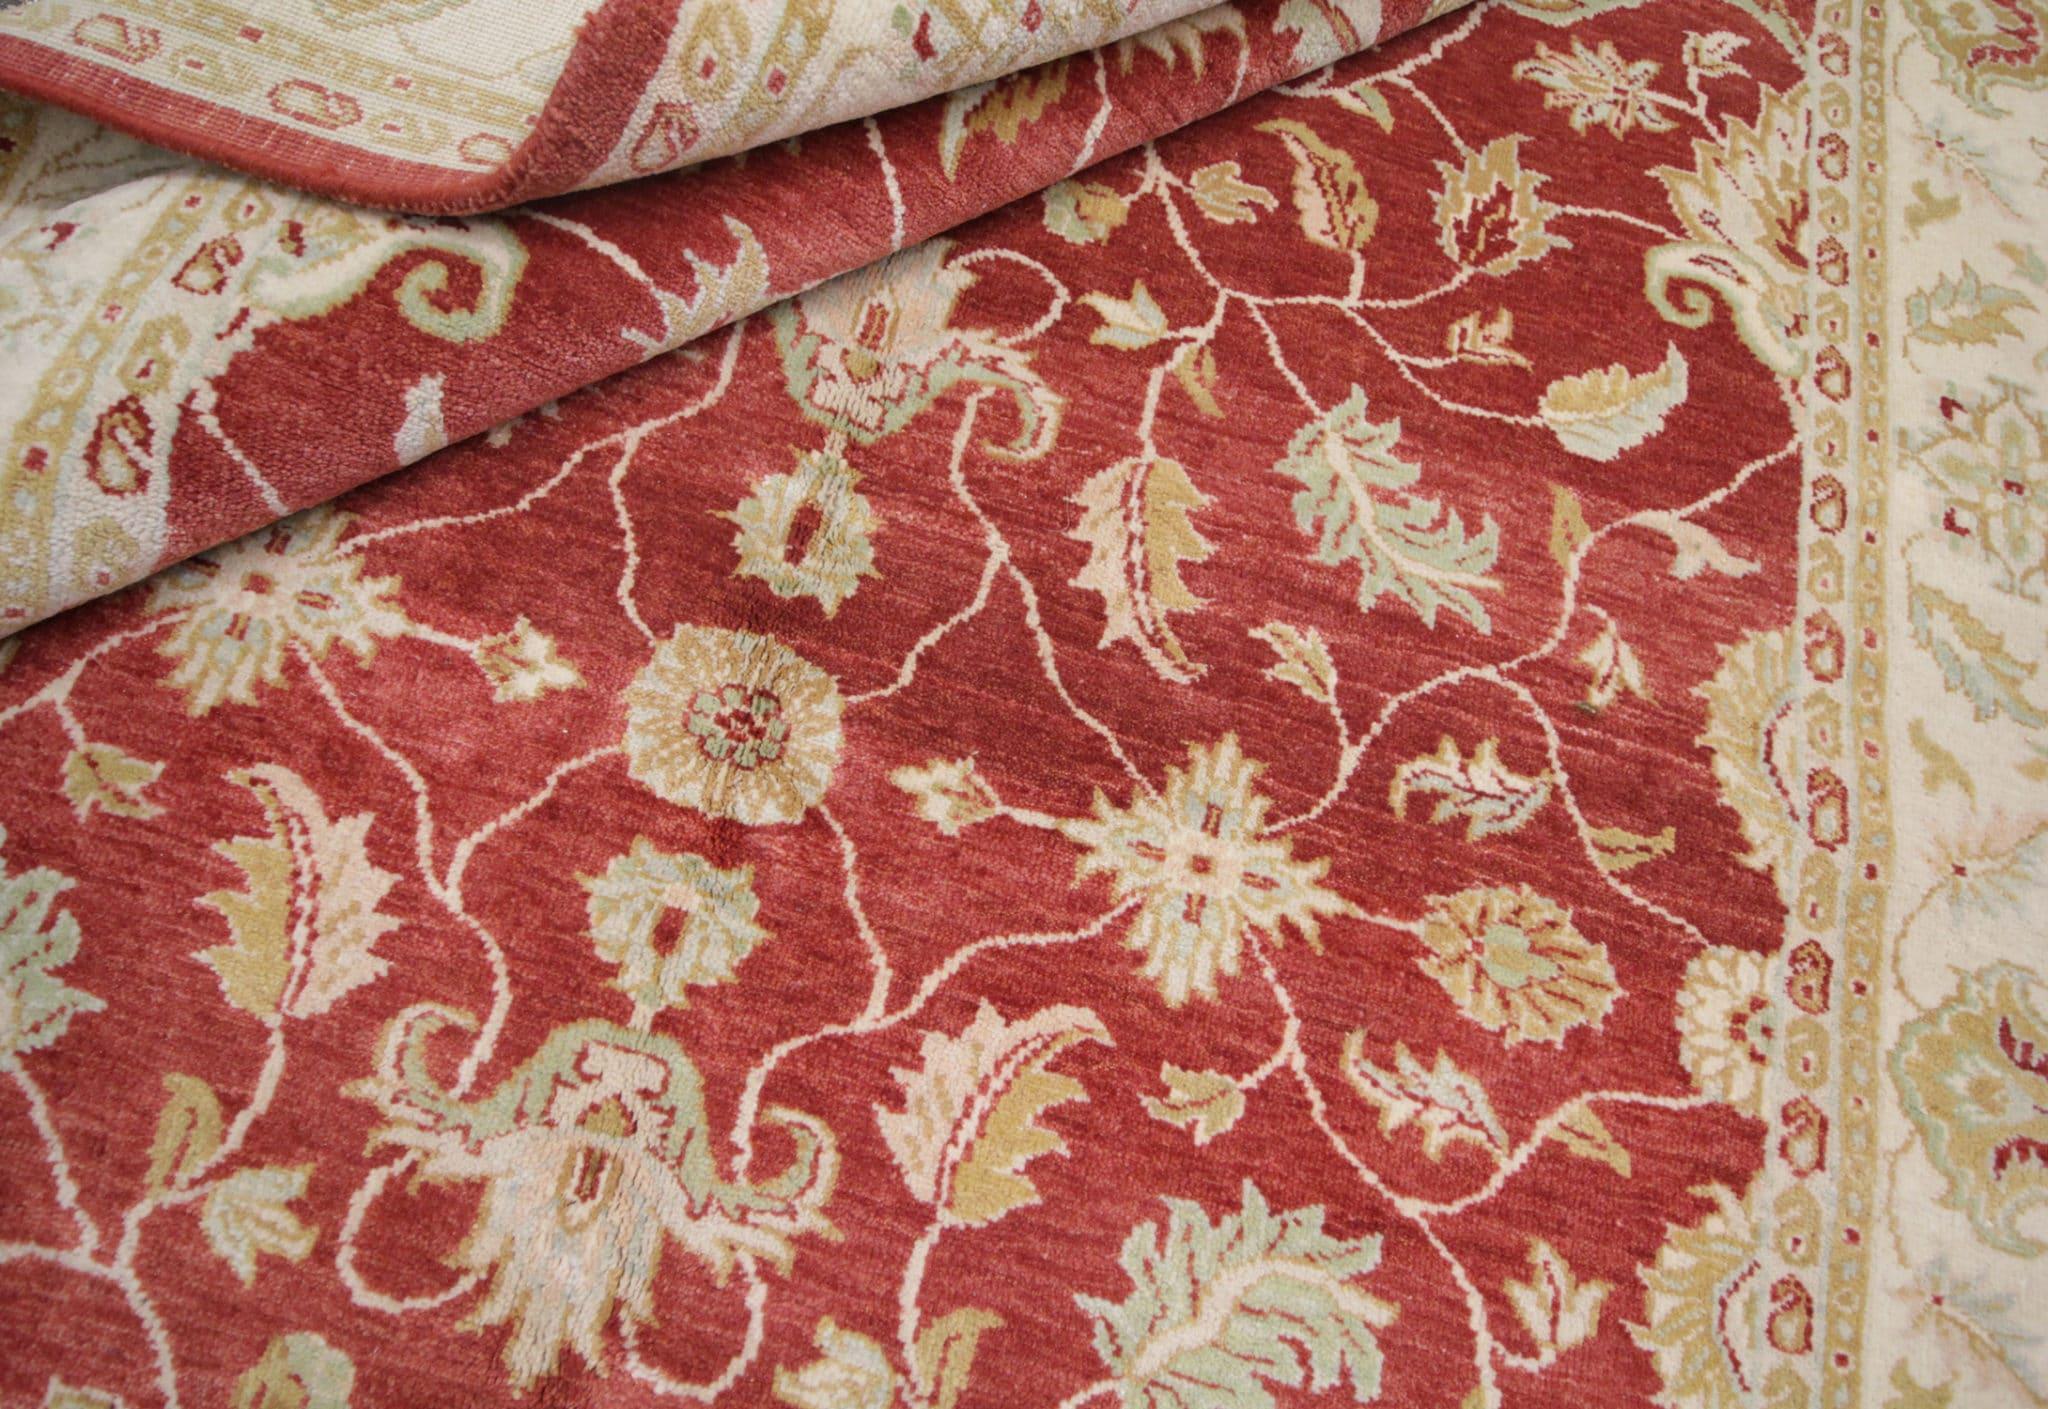 Contemporary Oriental Rugs, Red Living Room Rugs, Handmade Carpet Floral Ziegler Rugs For Sale